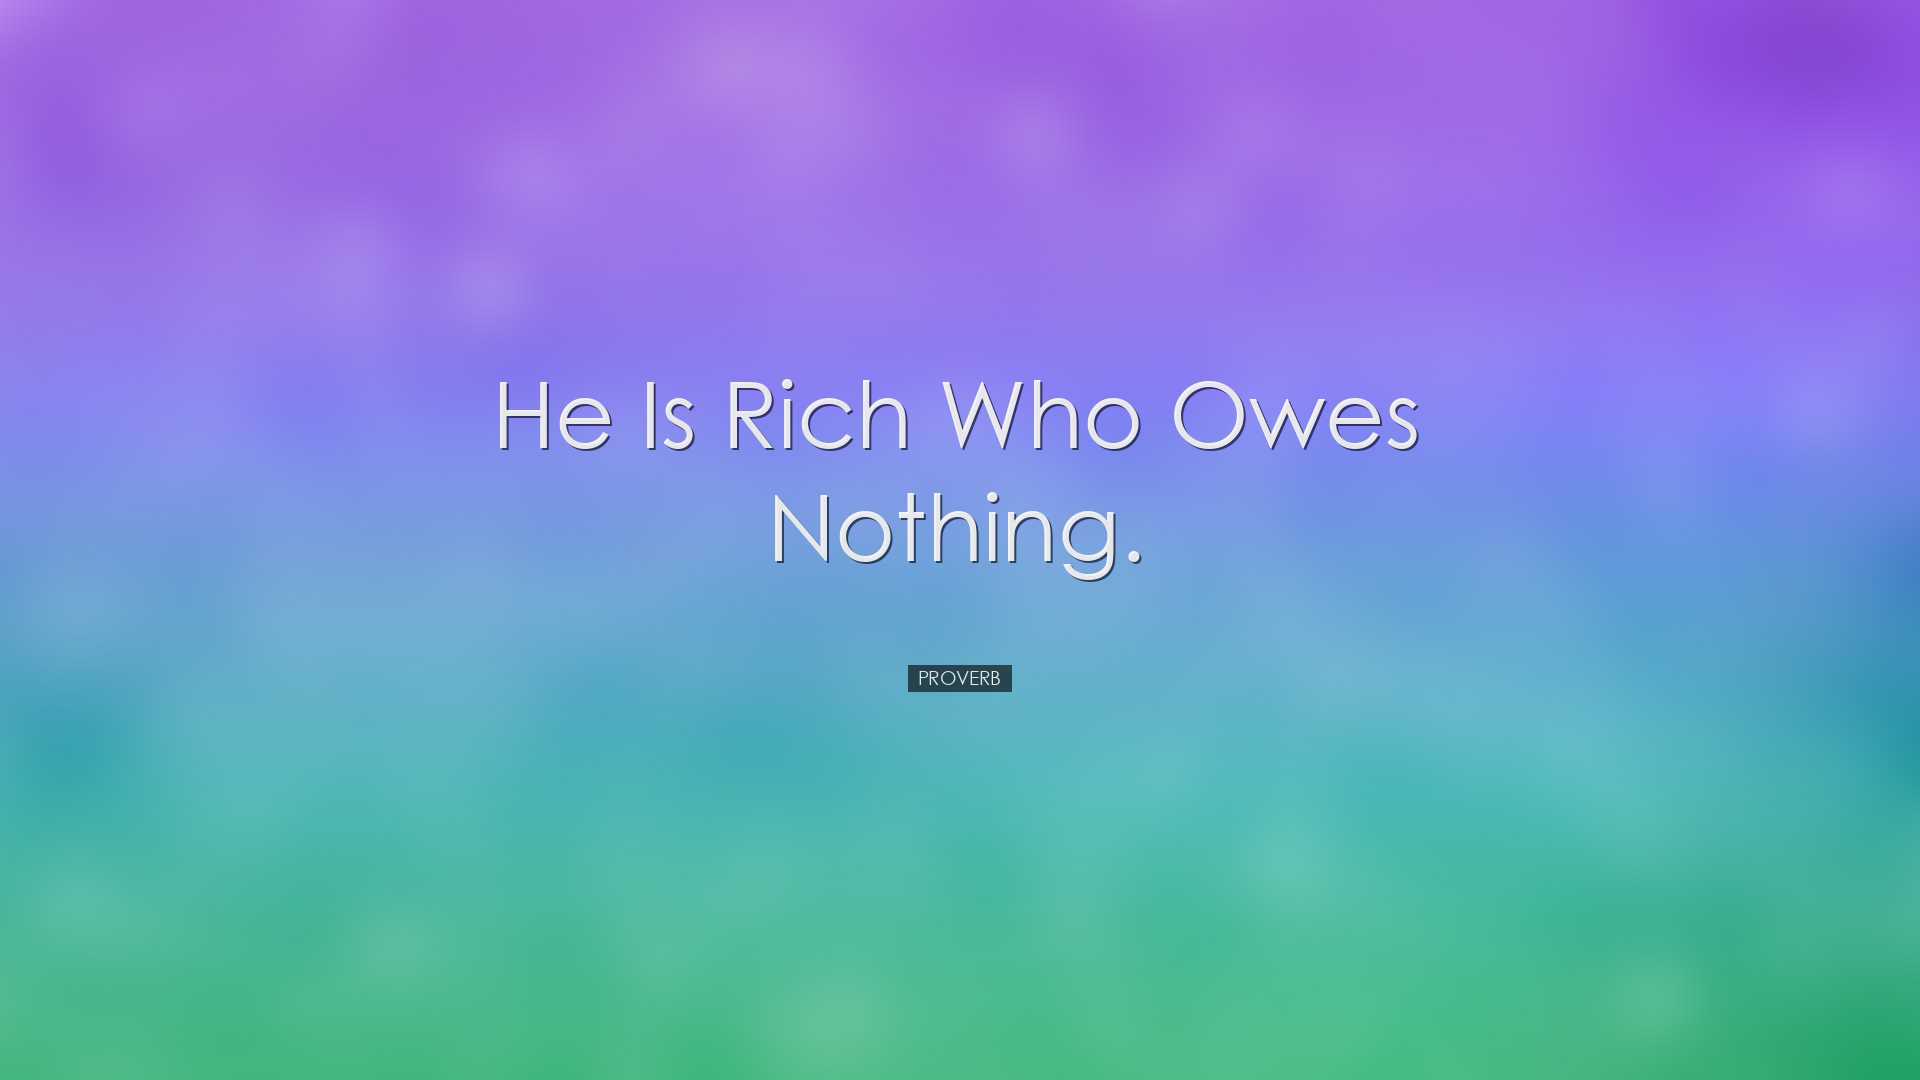 He is rich who owes nothing. - Proverb